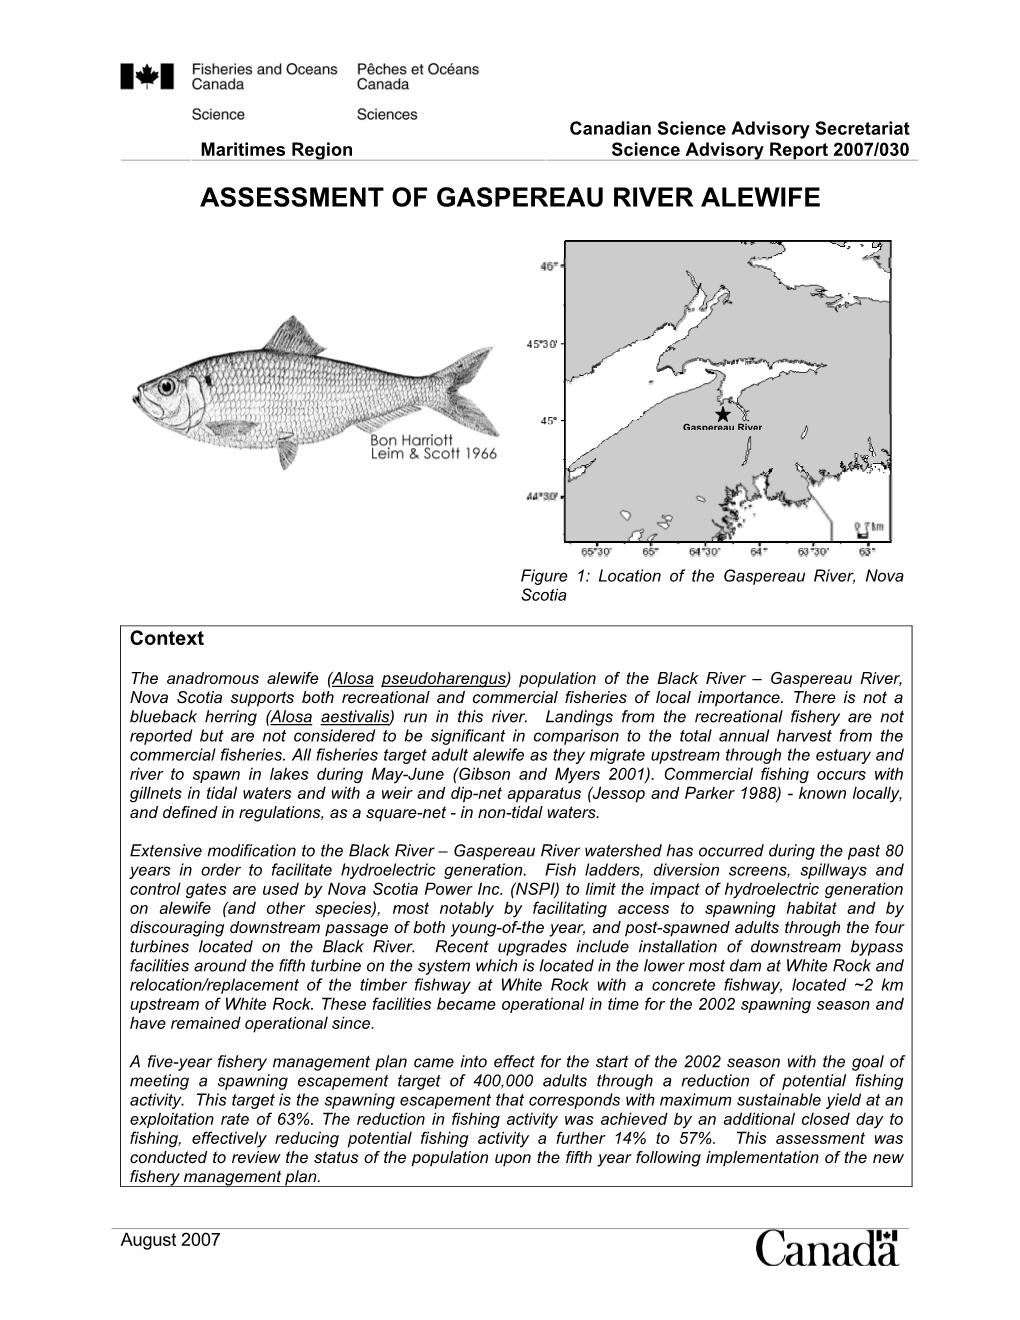 Assessment of Gaspereau River Alewife